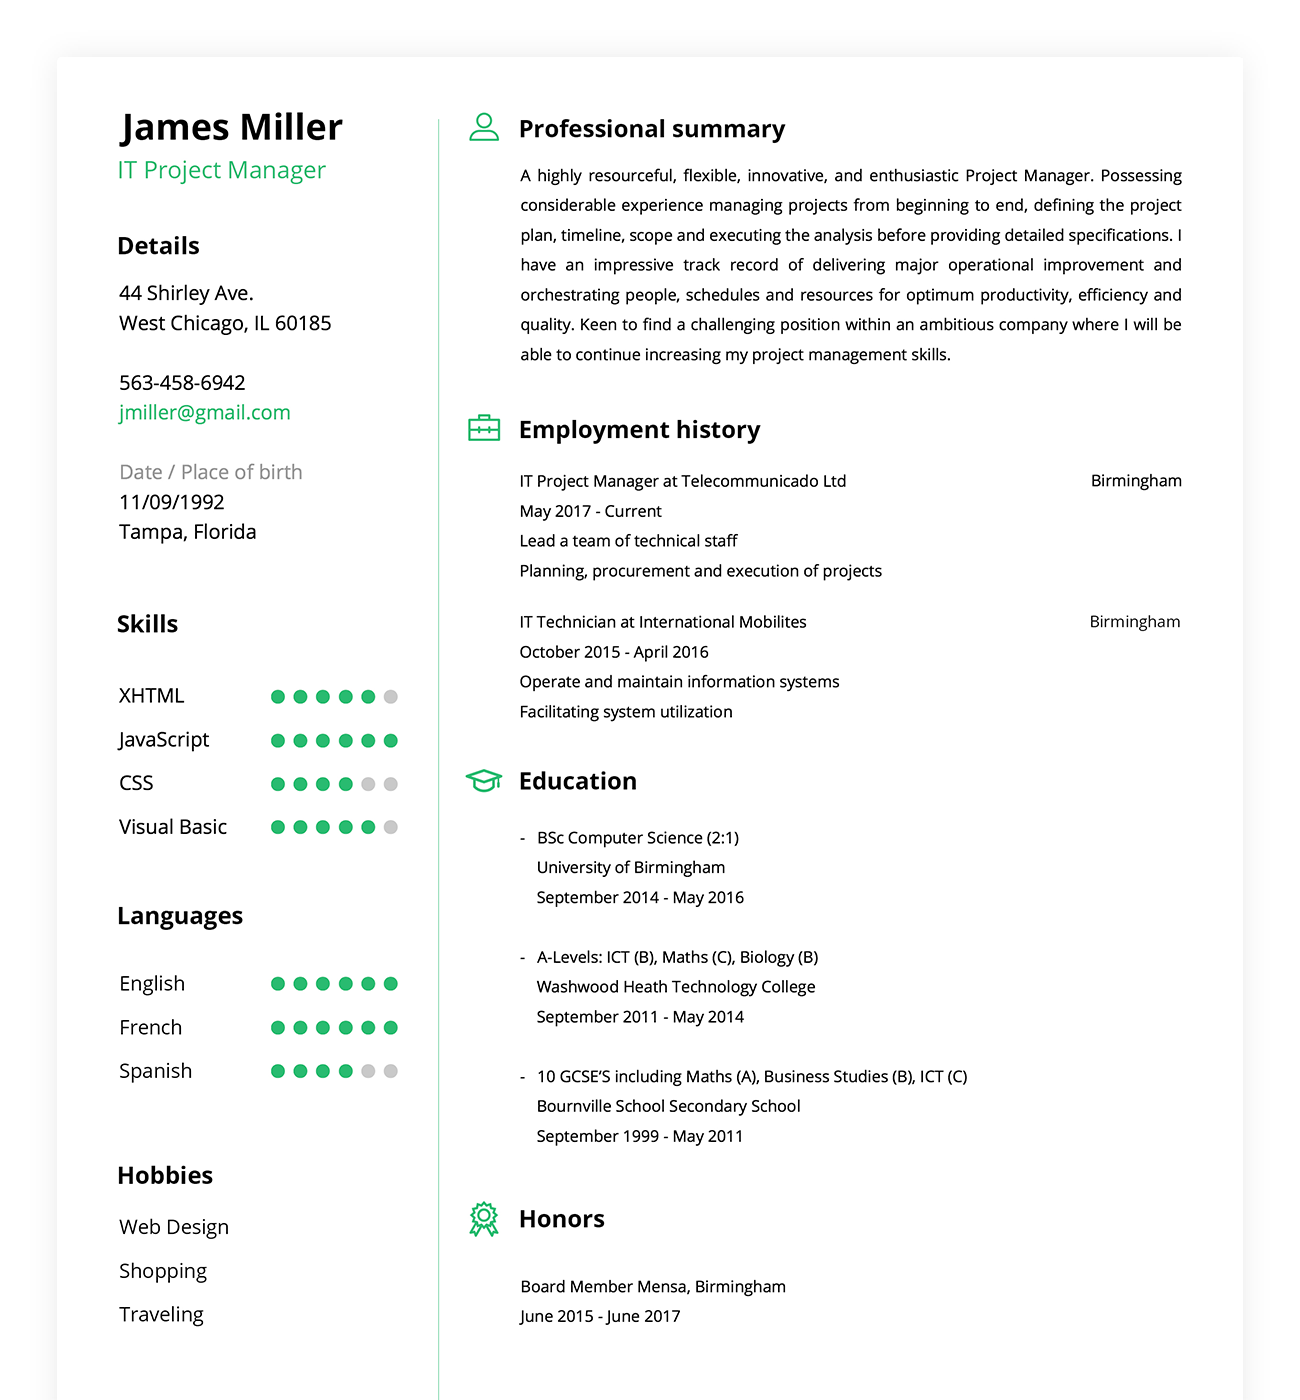 #1 Free Online Resume Builder  Make A Professional Resume In 5 Minutes ...